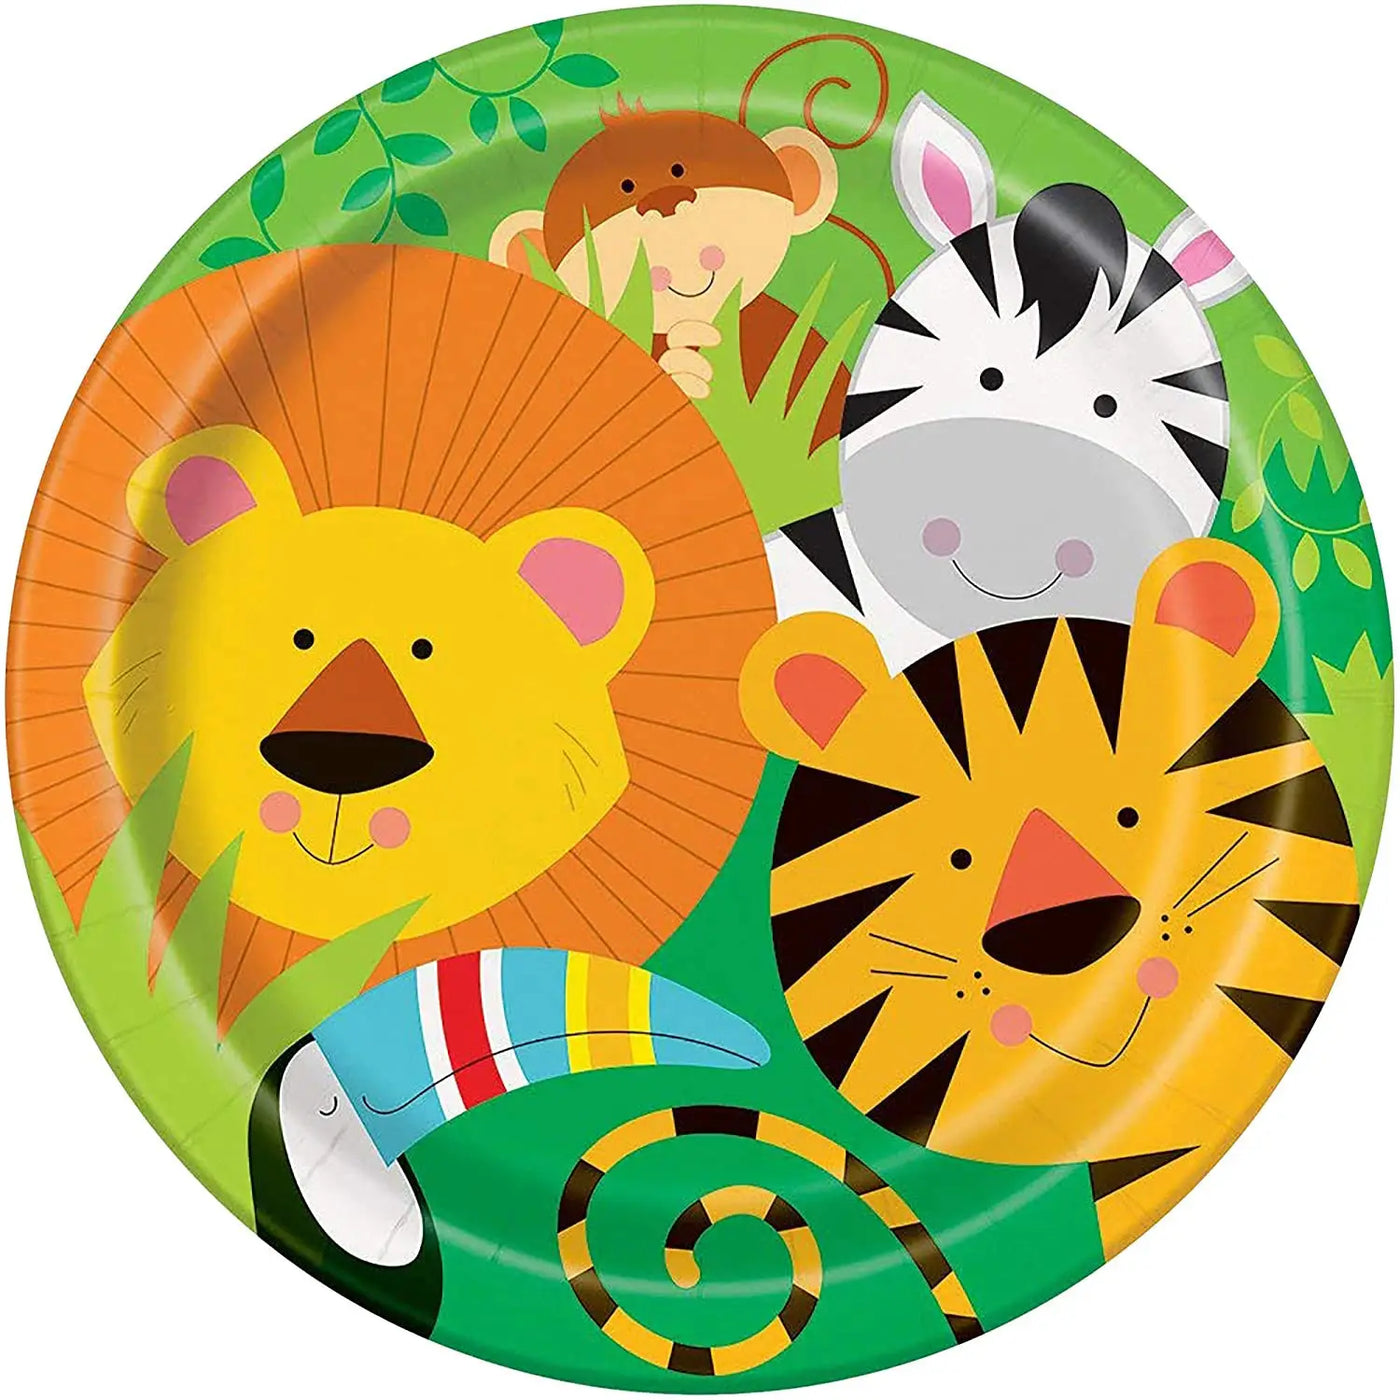 Pack of 16 Jungle Animal Party Paper Plates - Partyshakes Tableware